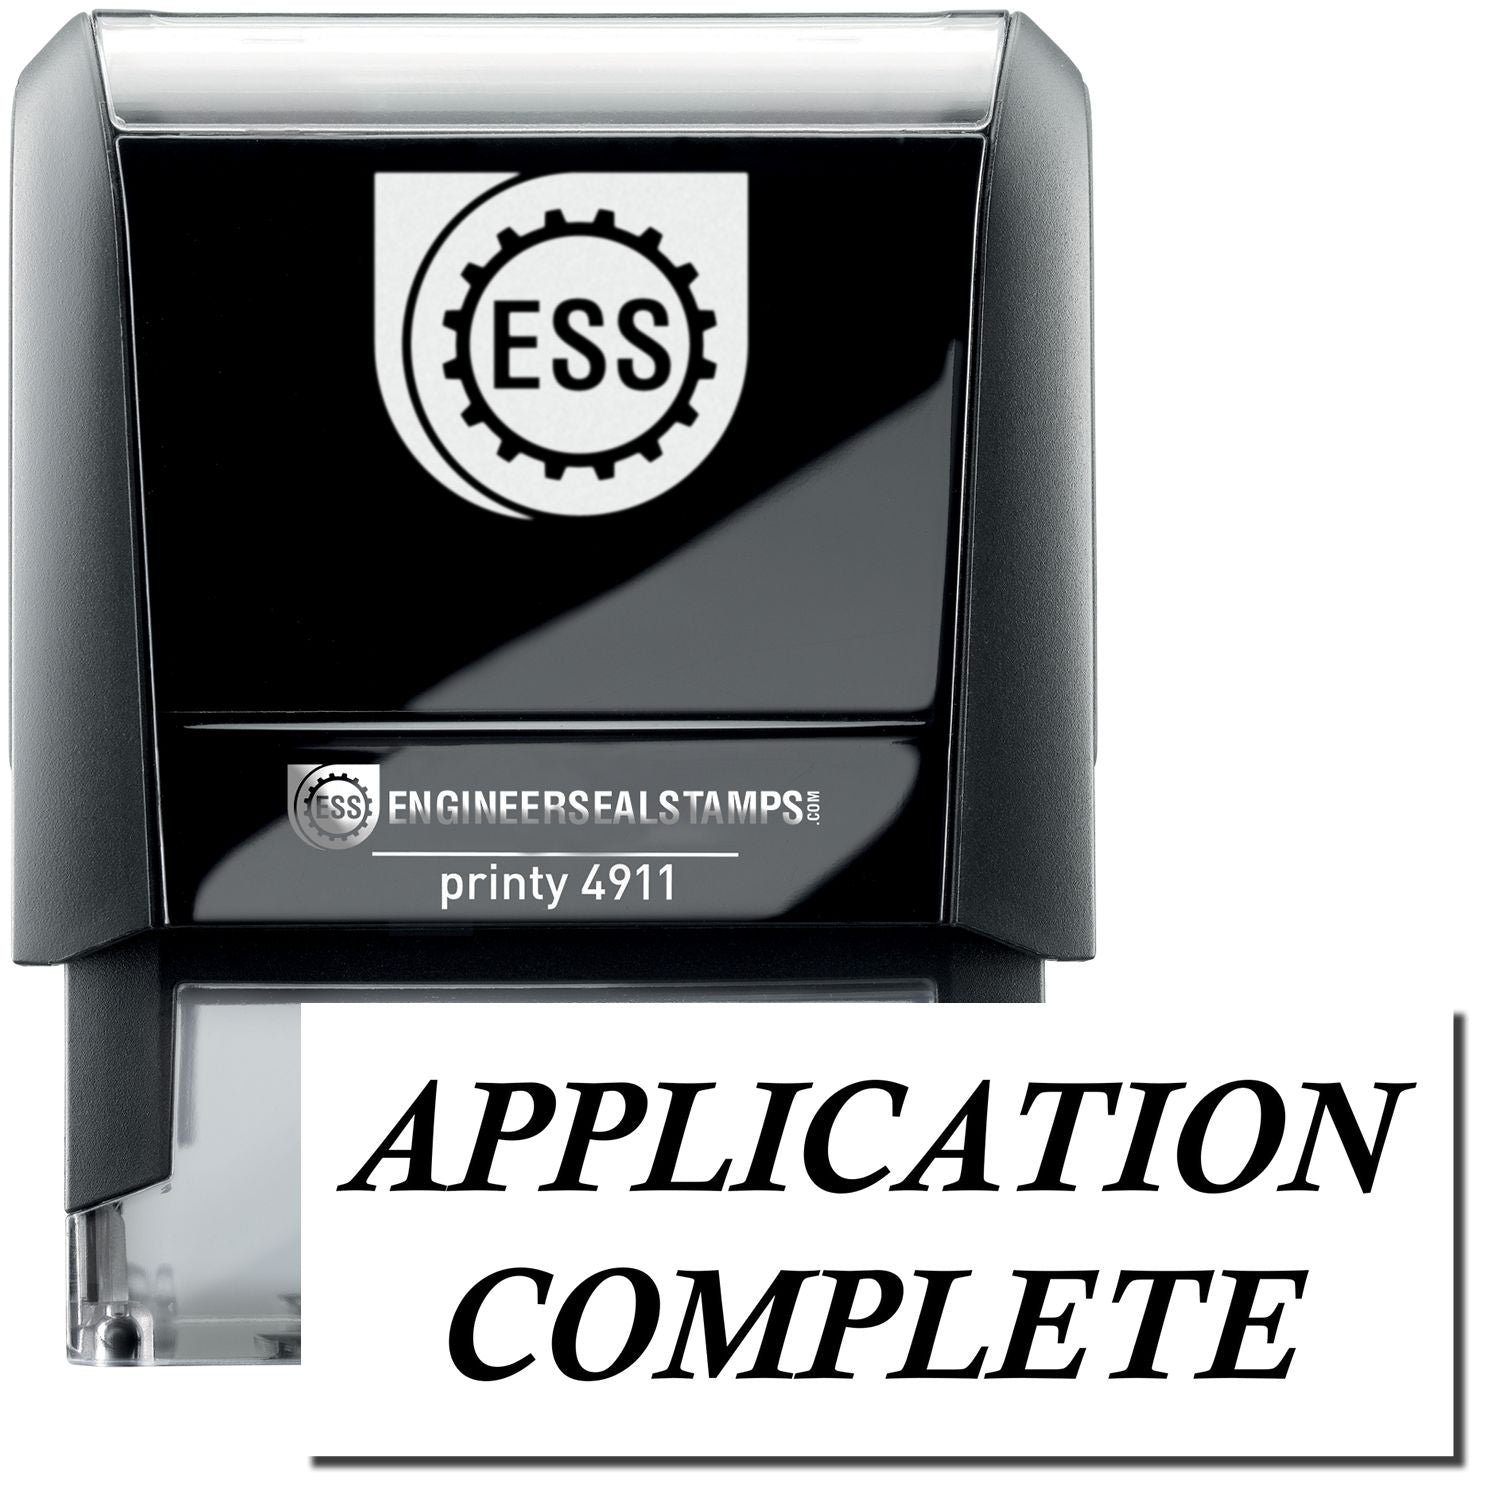 A self-inking stamp with a stamped image showing how the text "APPLICATION COMPLETE" is displayed after stamping.